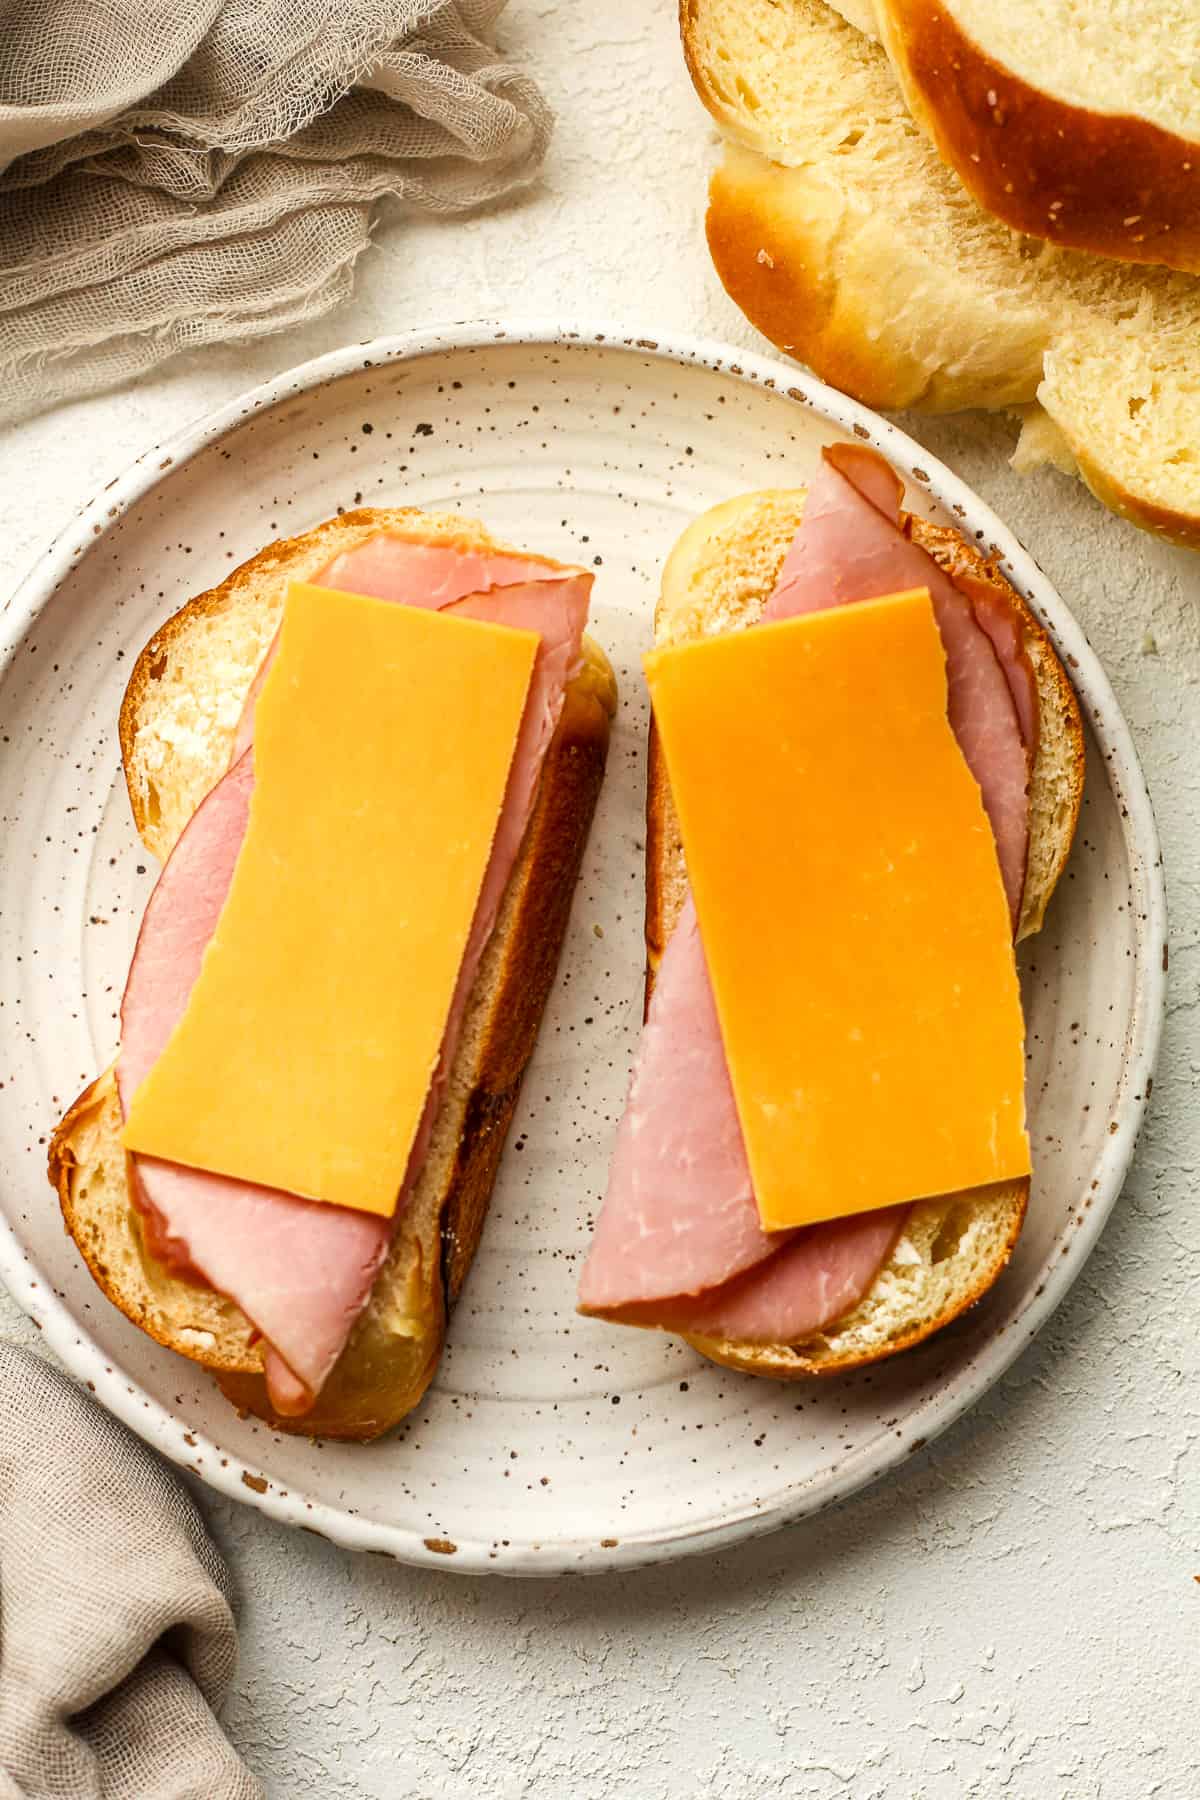 A plate of two slices of brioche with ham and cheese.